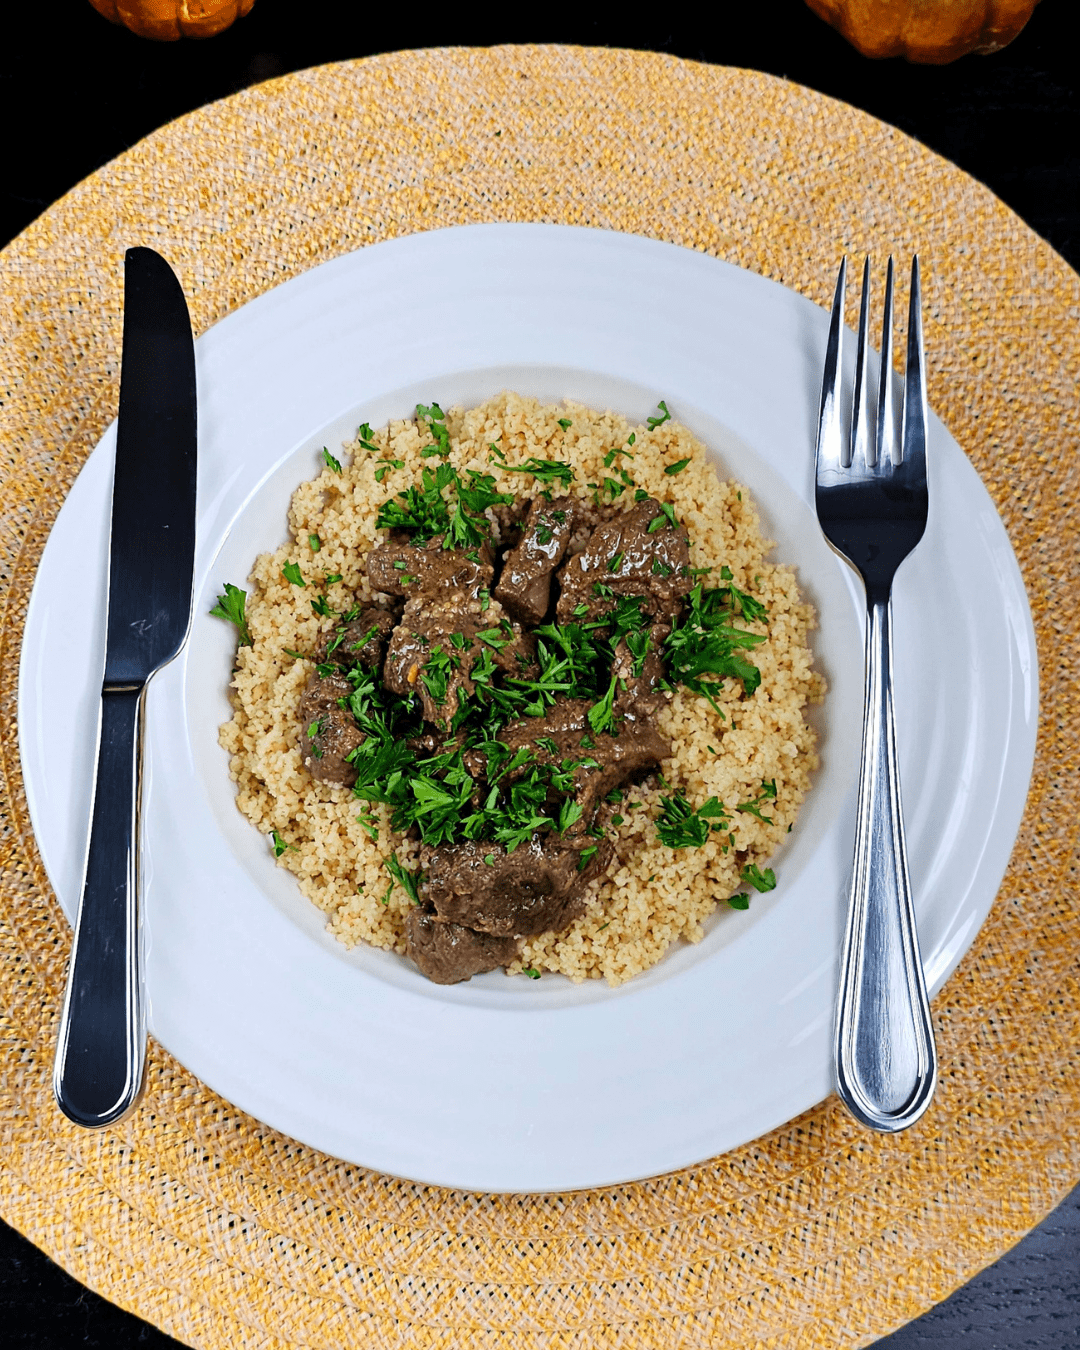 Klishi Veal Stew with Whole Wheat Couscous